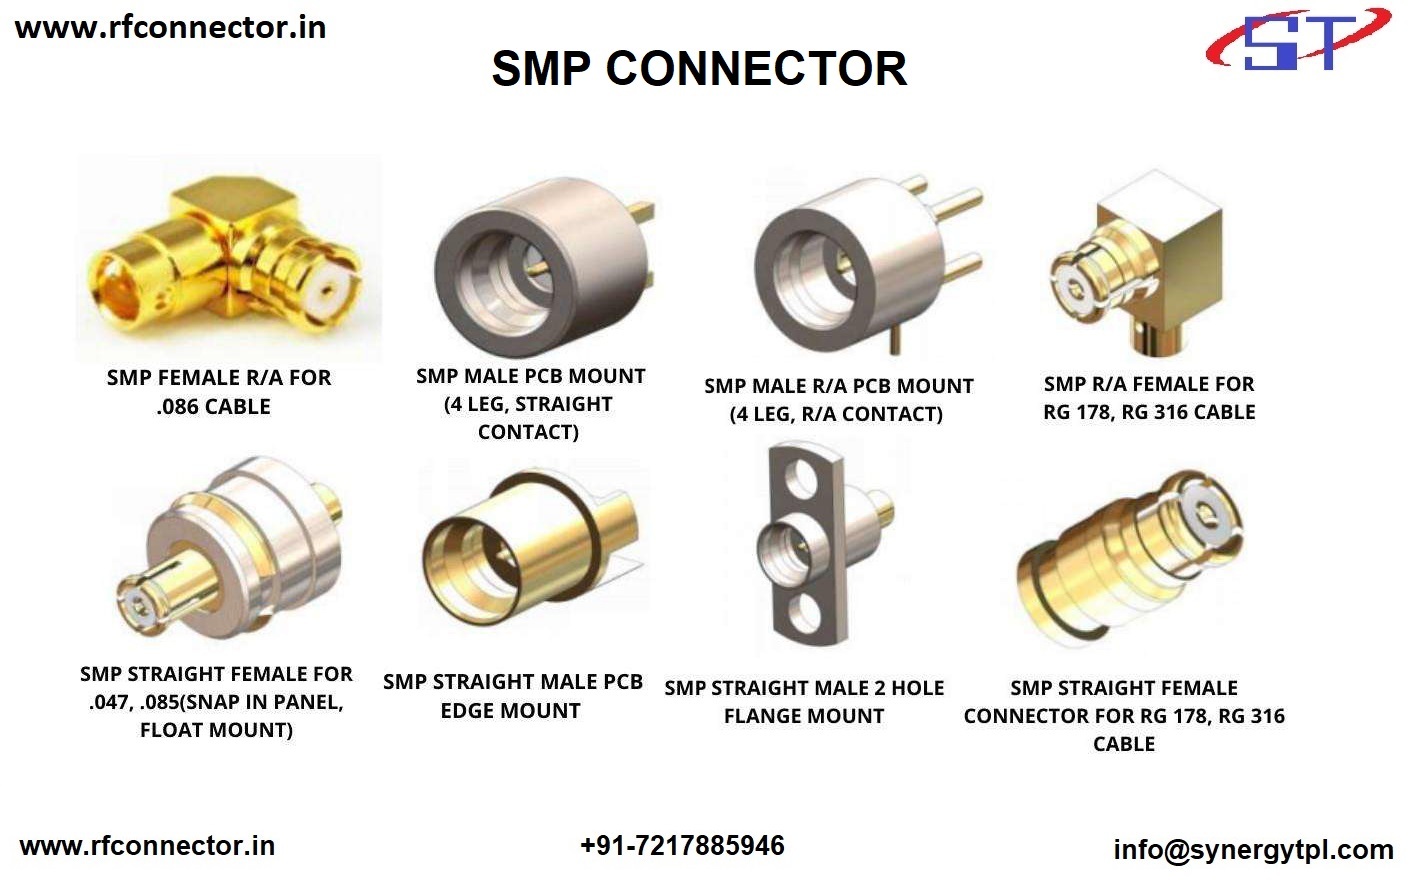 SMB male right angle connector for BT 3002 cable